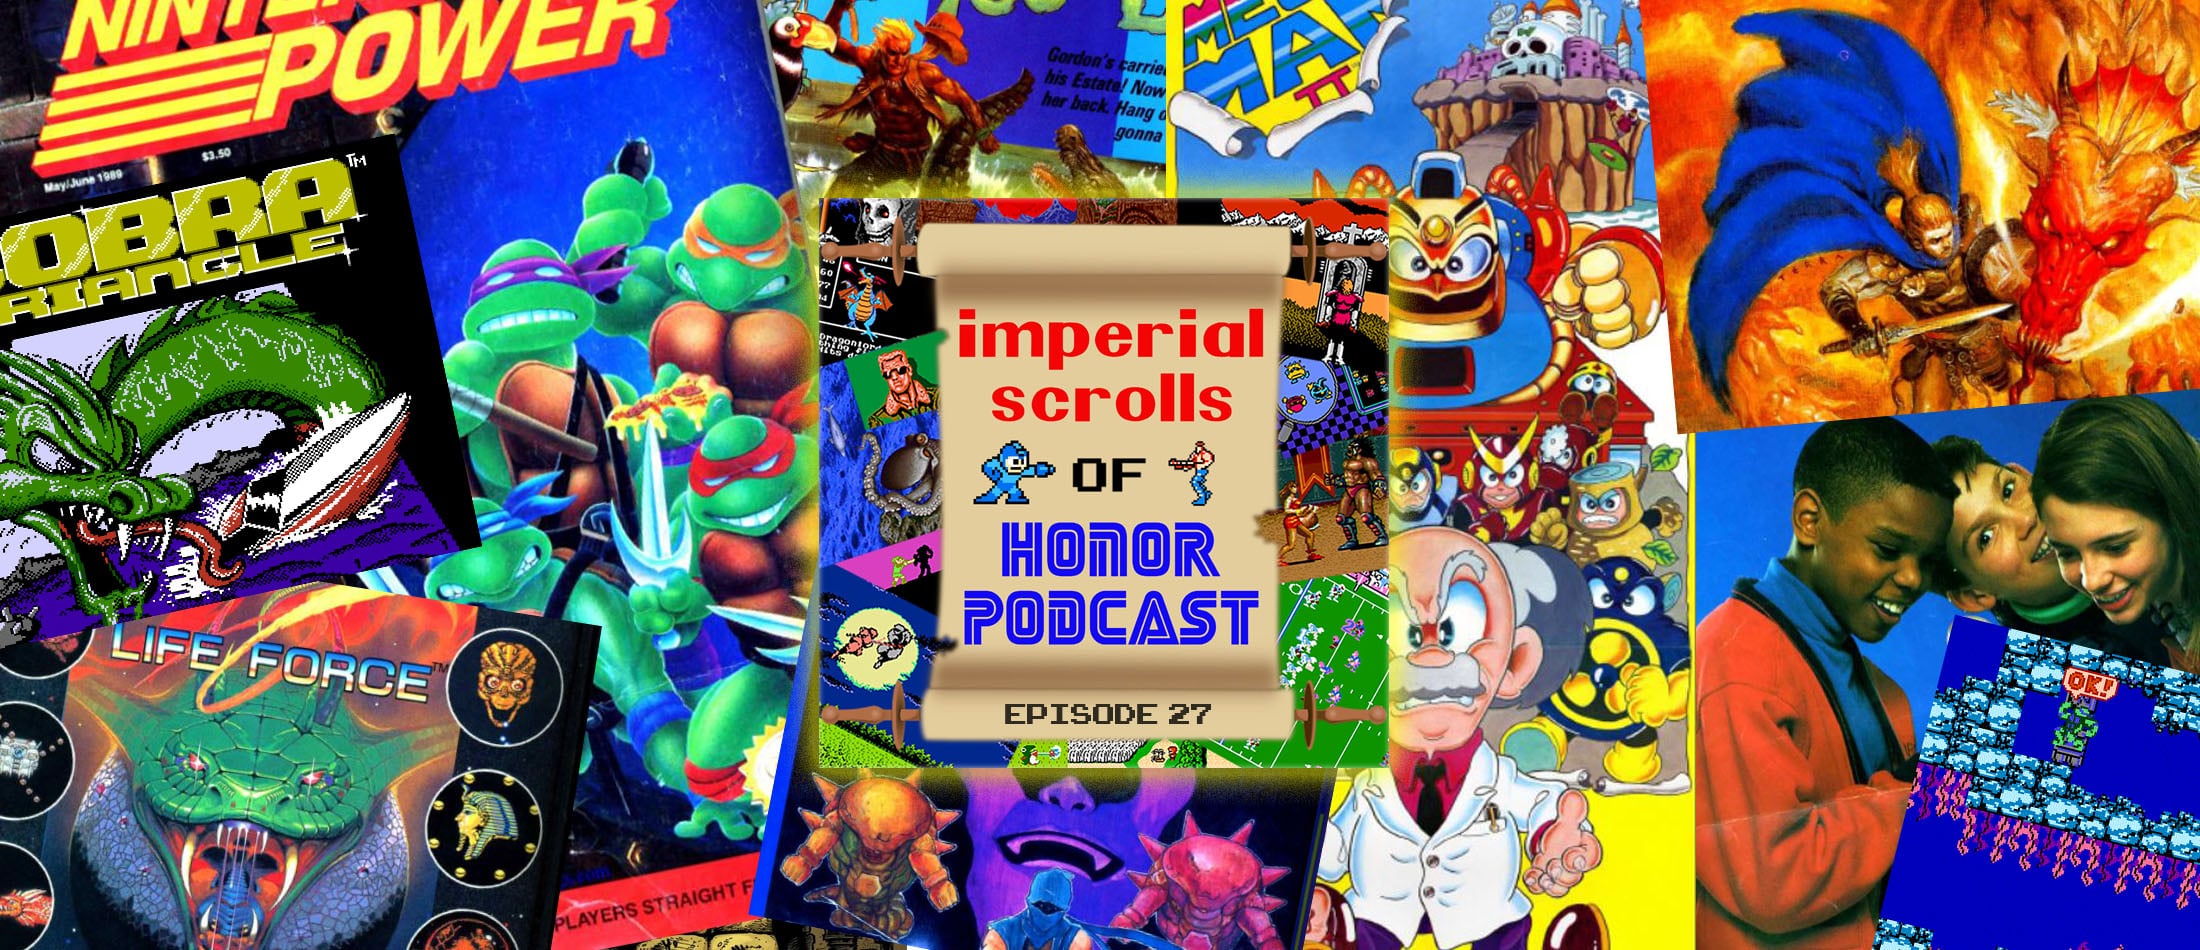 Imperial Scrolls of Honor Podcast - Episode 27 - Nintendo Power #6